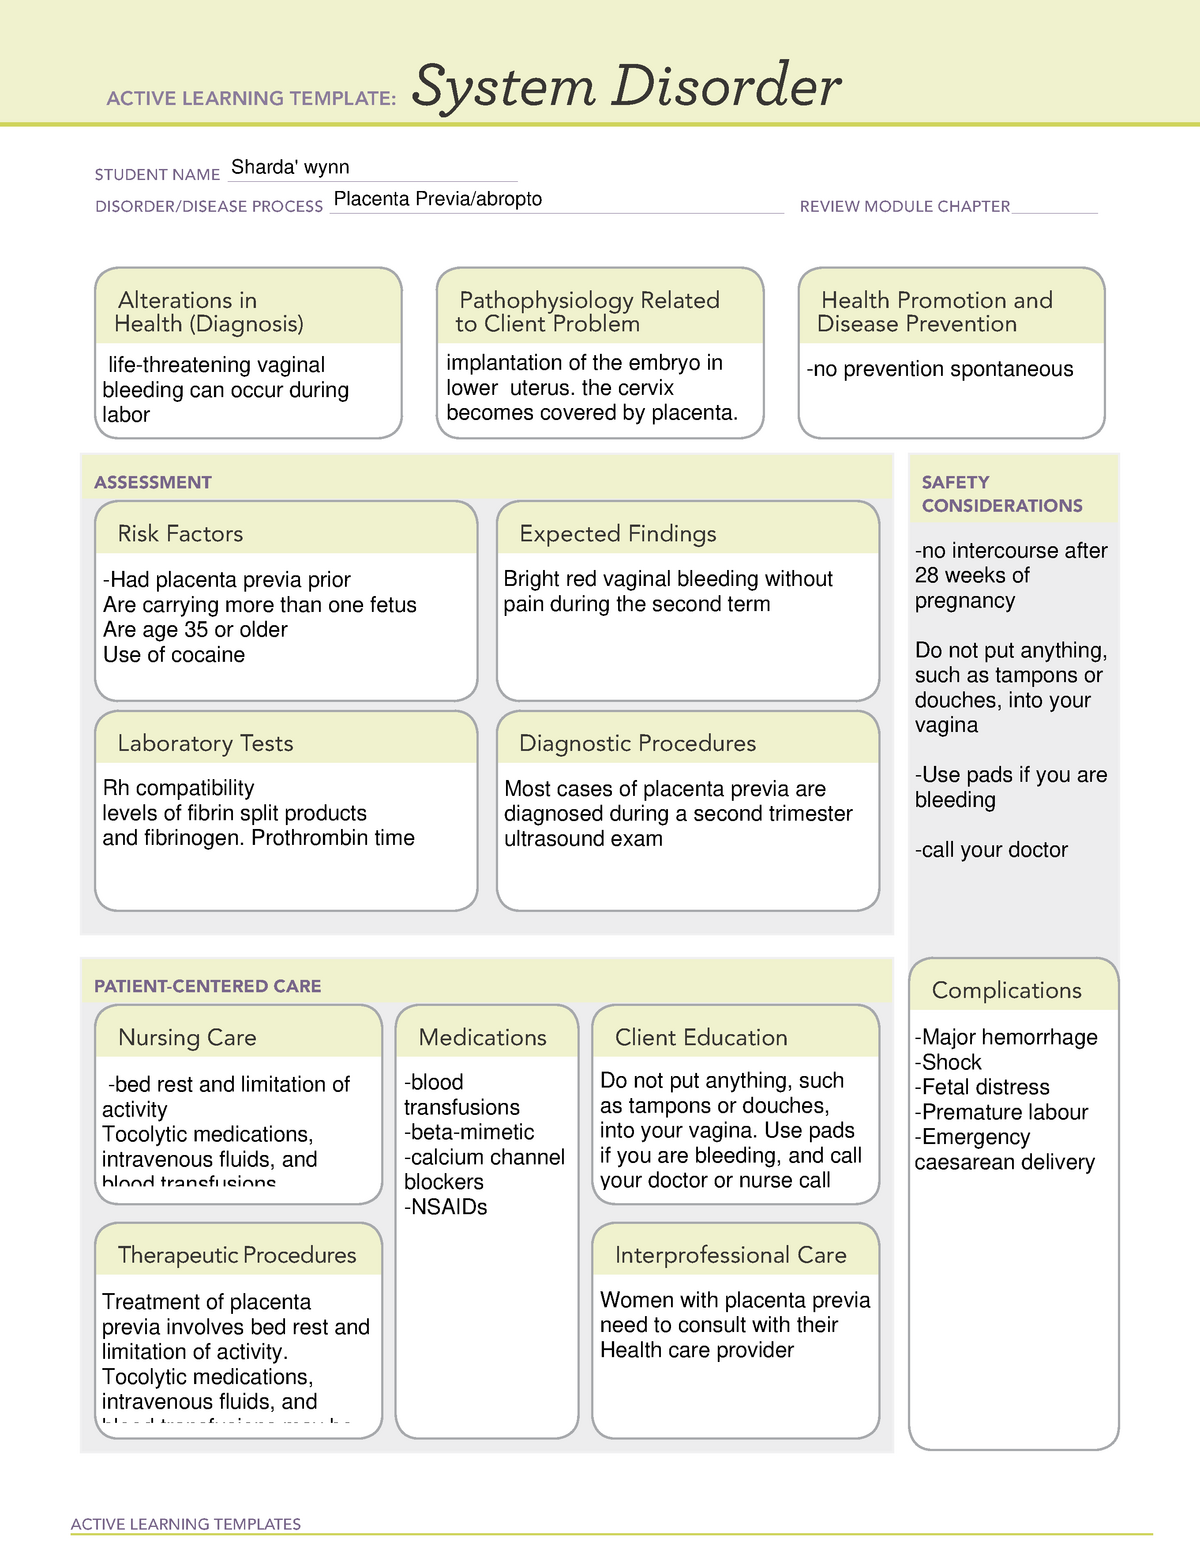 System Disorders Placenta Previa abrt ACTIVE LEARNING TEMPLATES